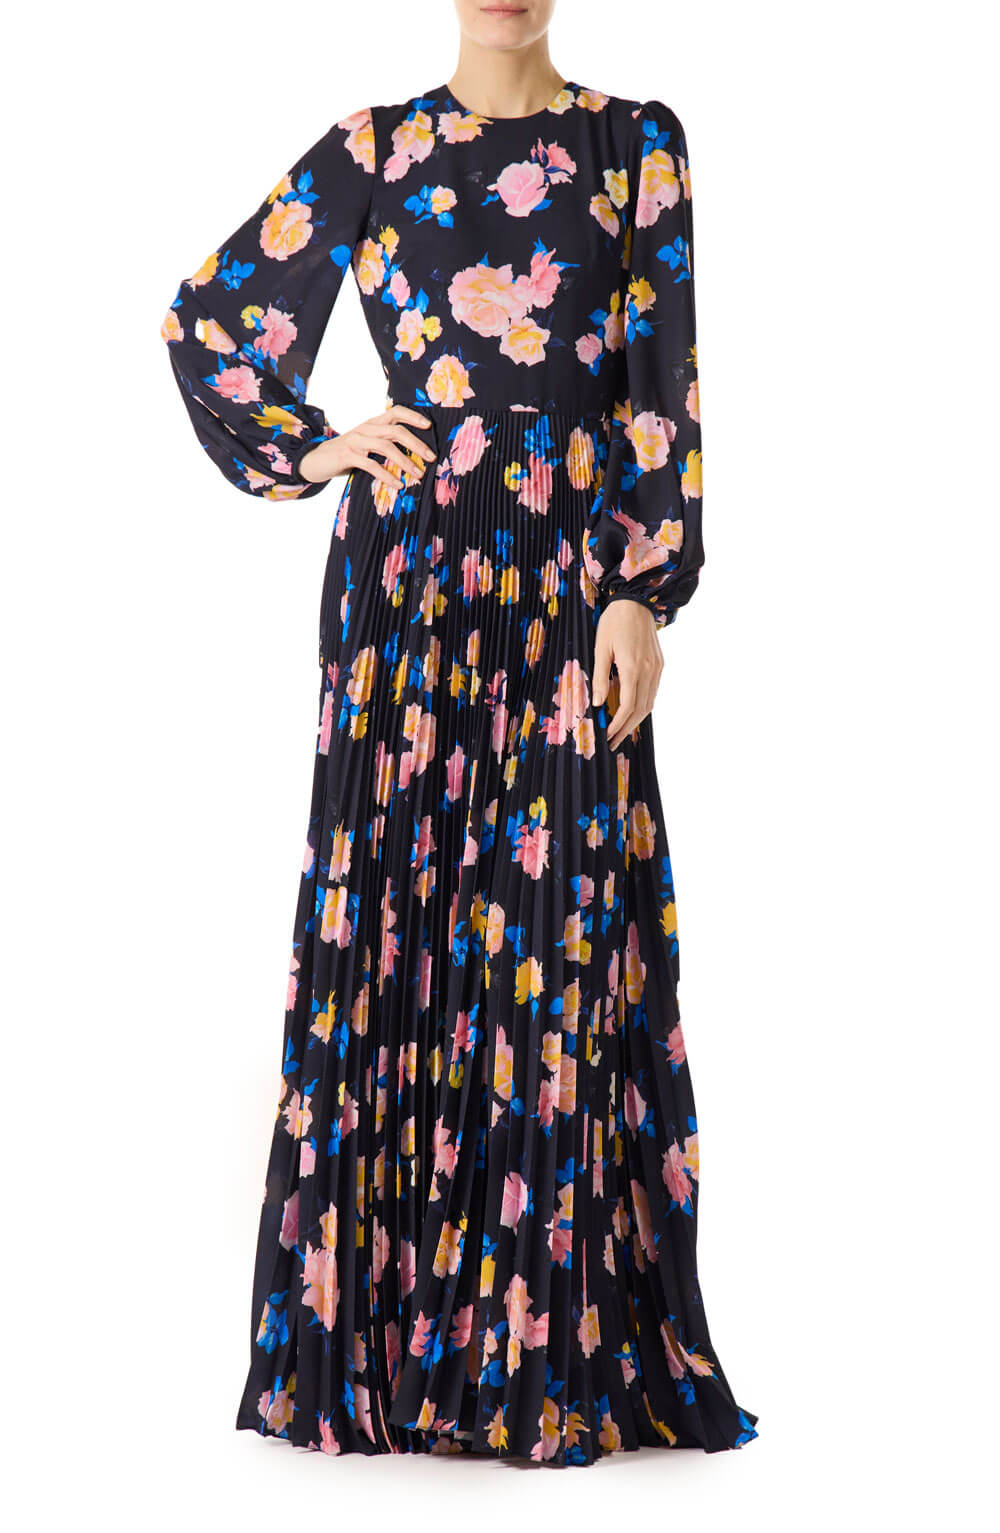 Monique Lhuillier long sleeve pleated gown in navy floral printed crepe fabric.